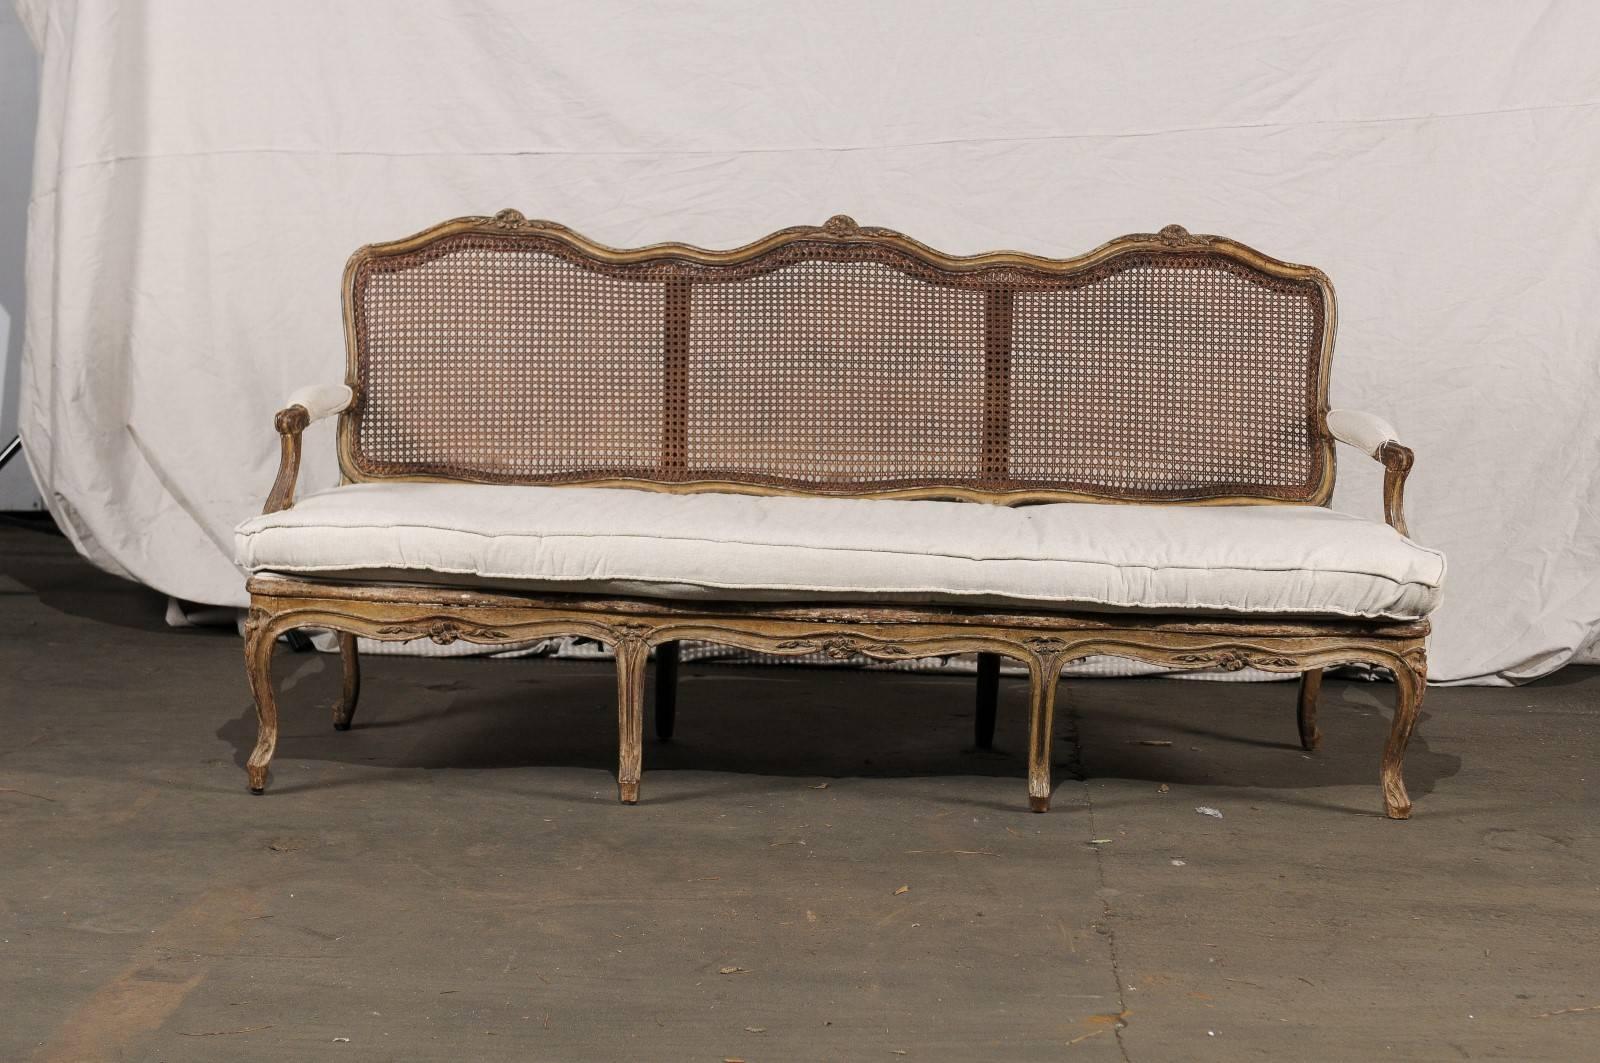 18th-19th century Regence settee with cane.